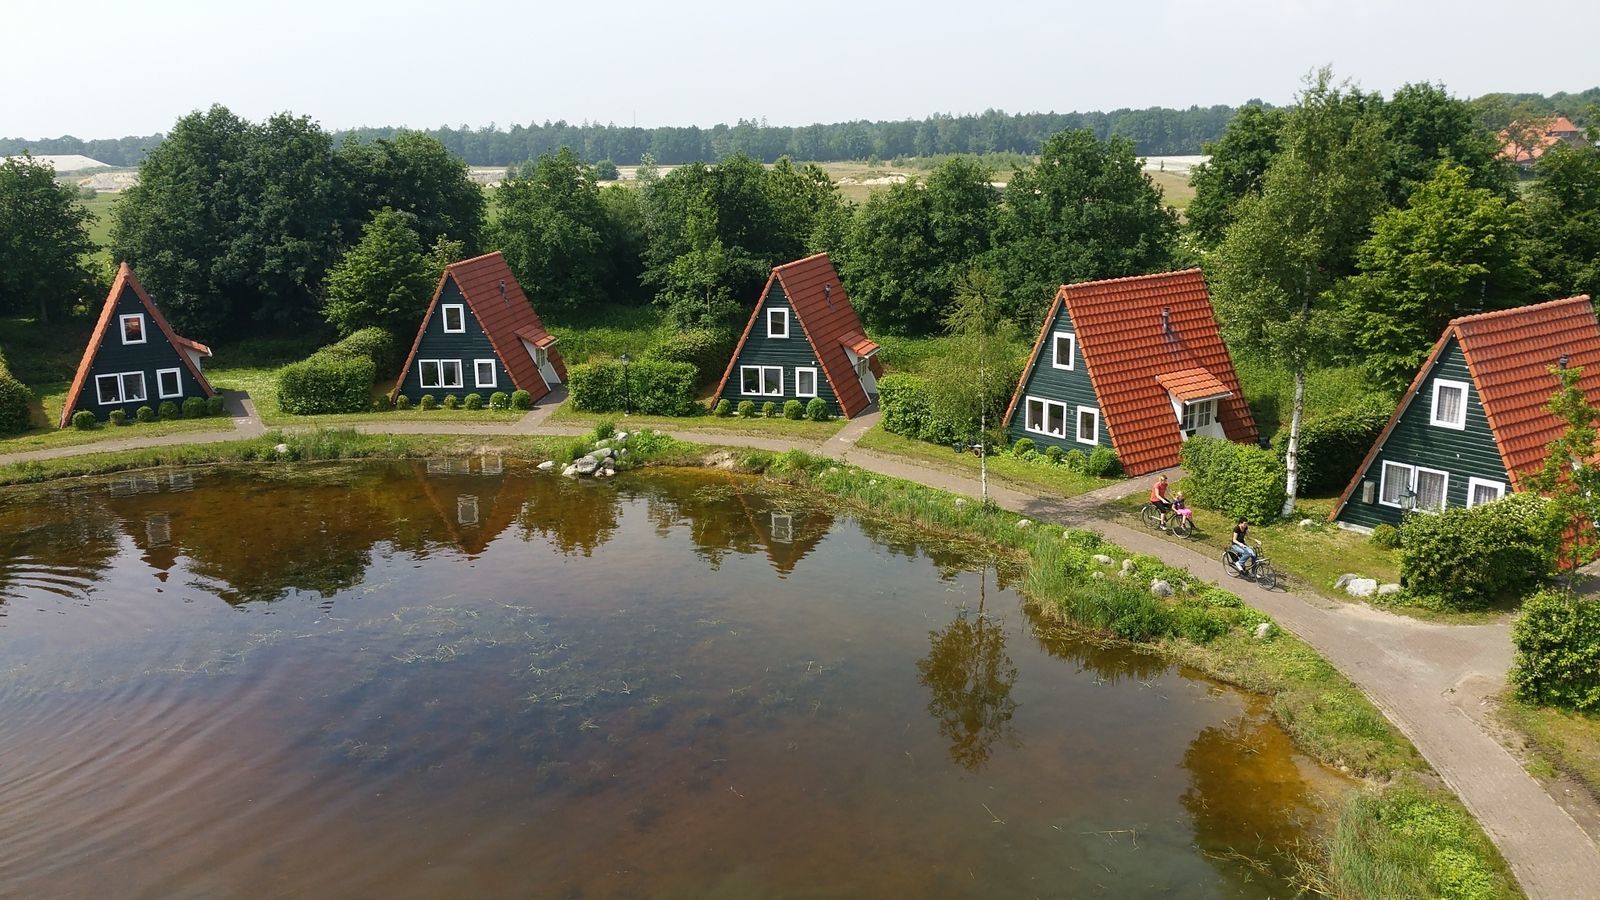 Fishermen's houses for 6 people